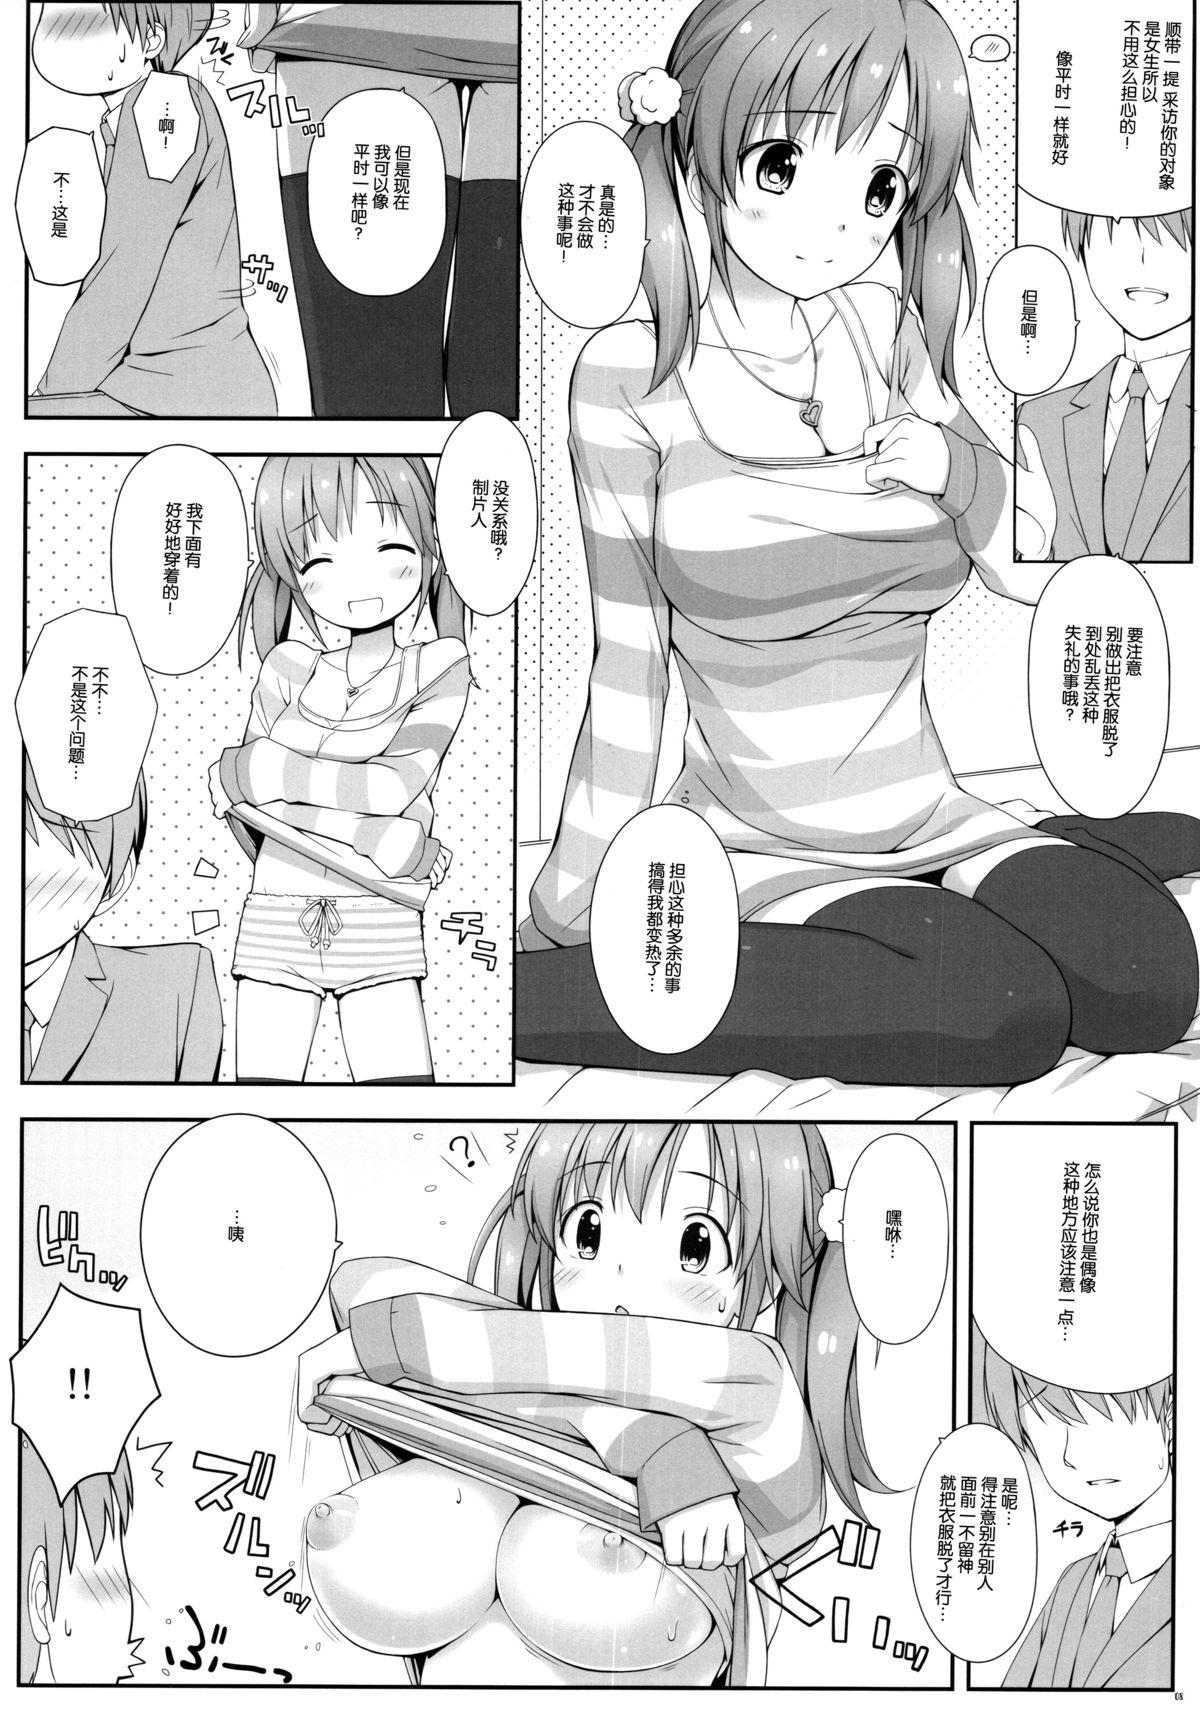 Highschool BAD COMMUNICATION? 15 - The idolmaster Pawg - Page 9